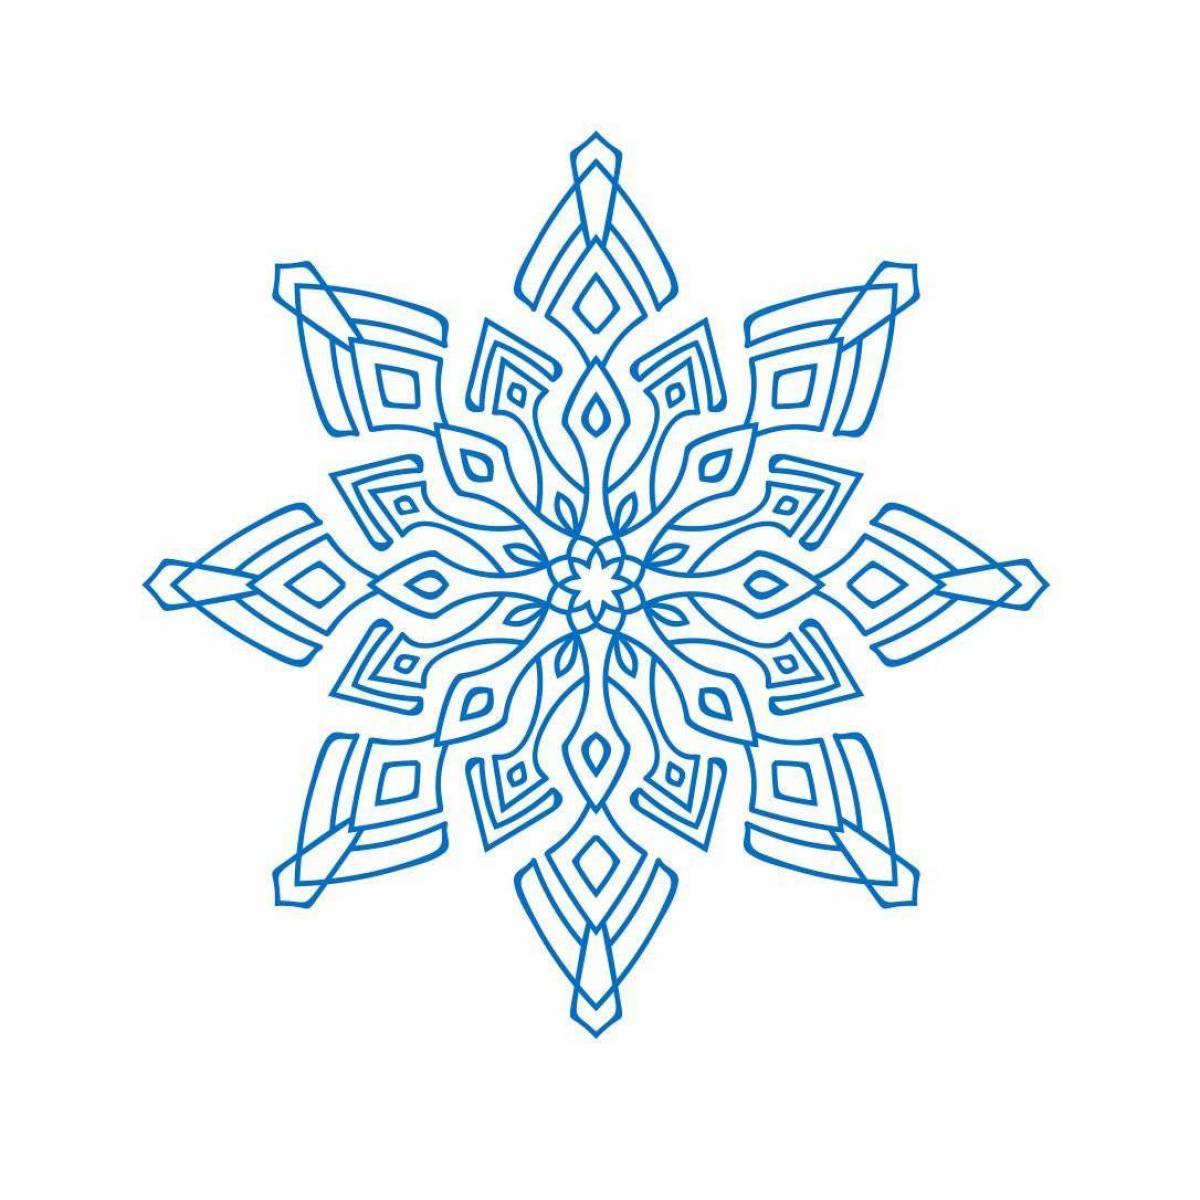 Adorable snowflake coloring book for kids 5-6 years old